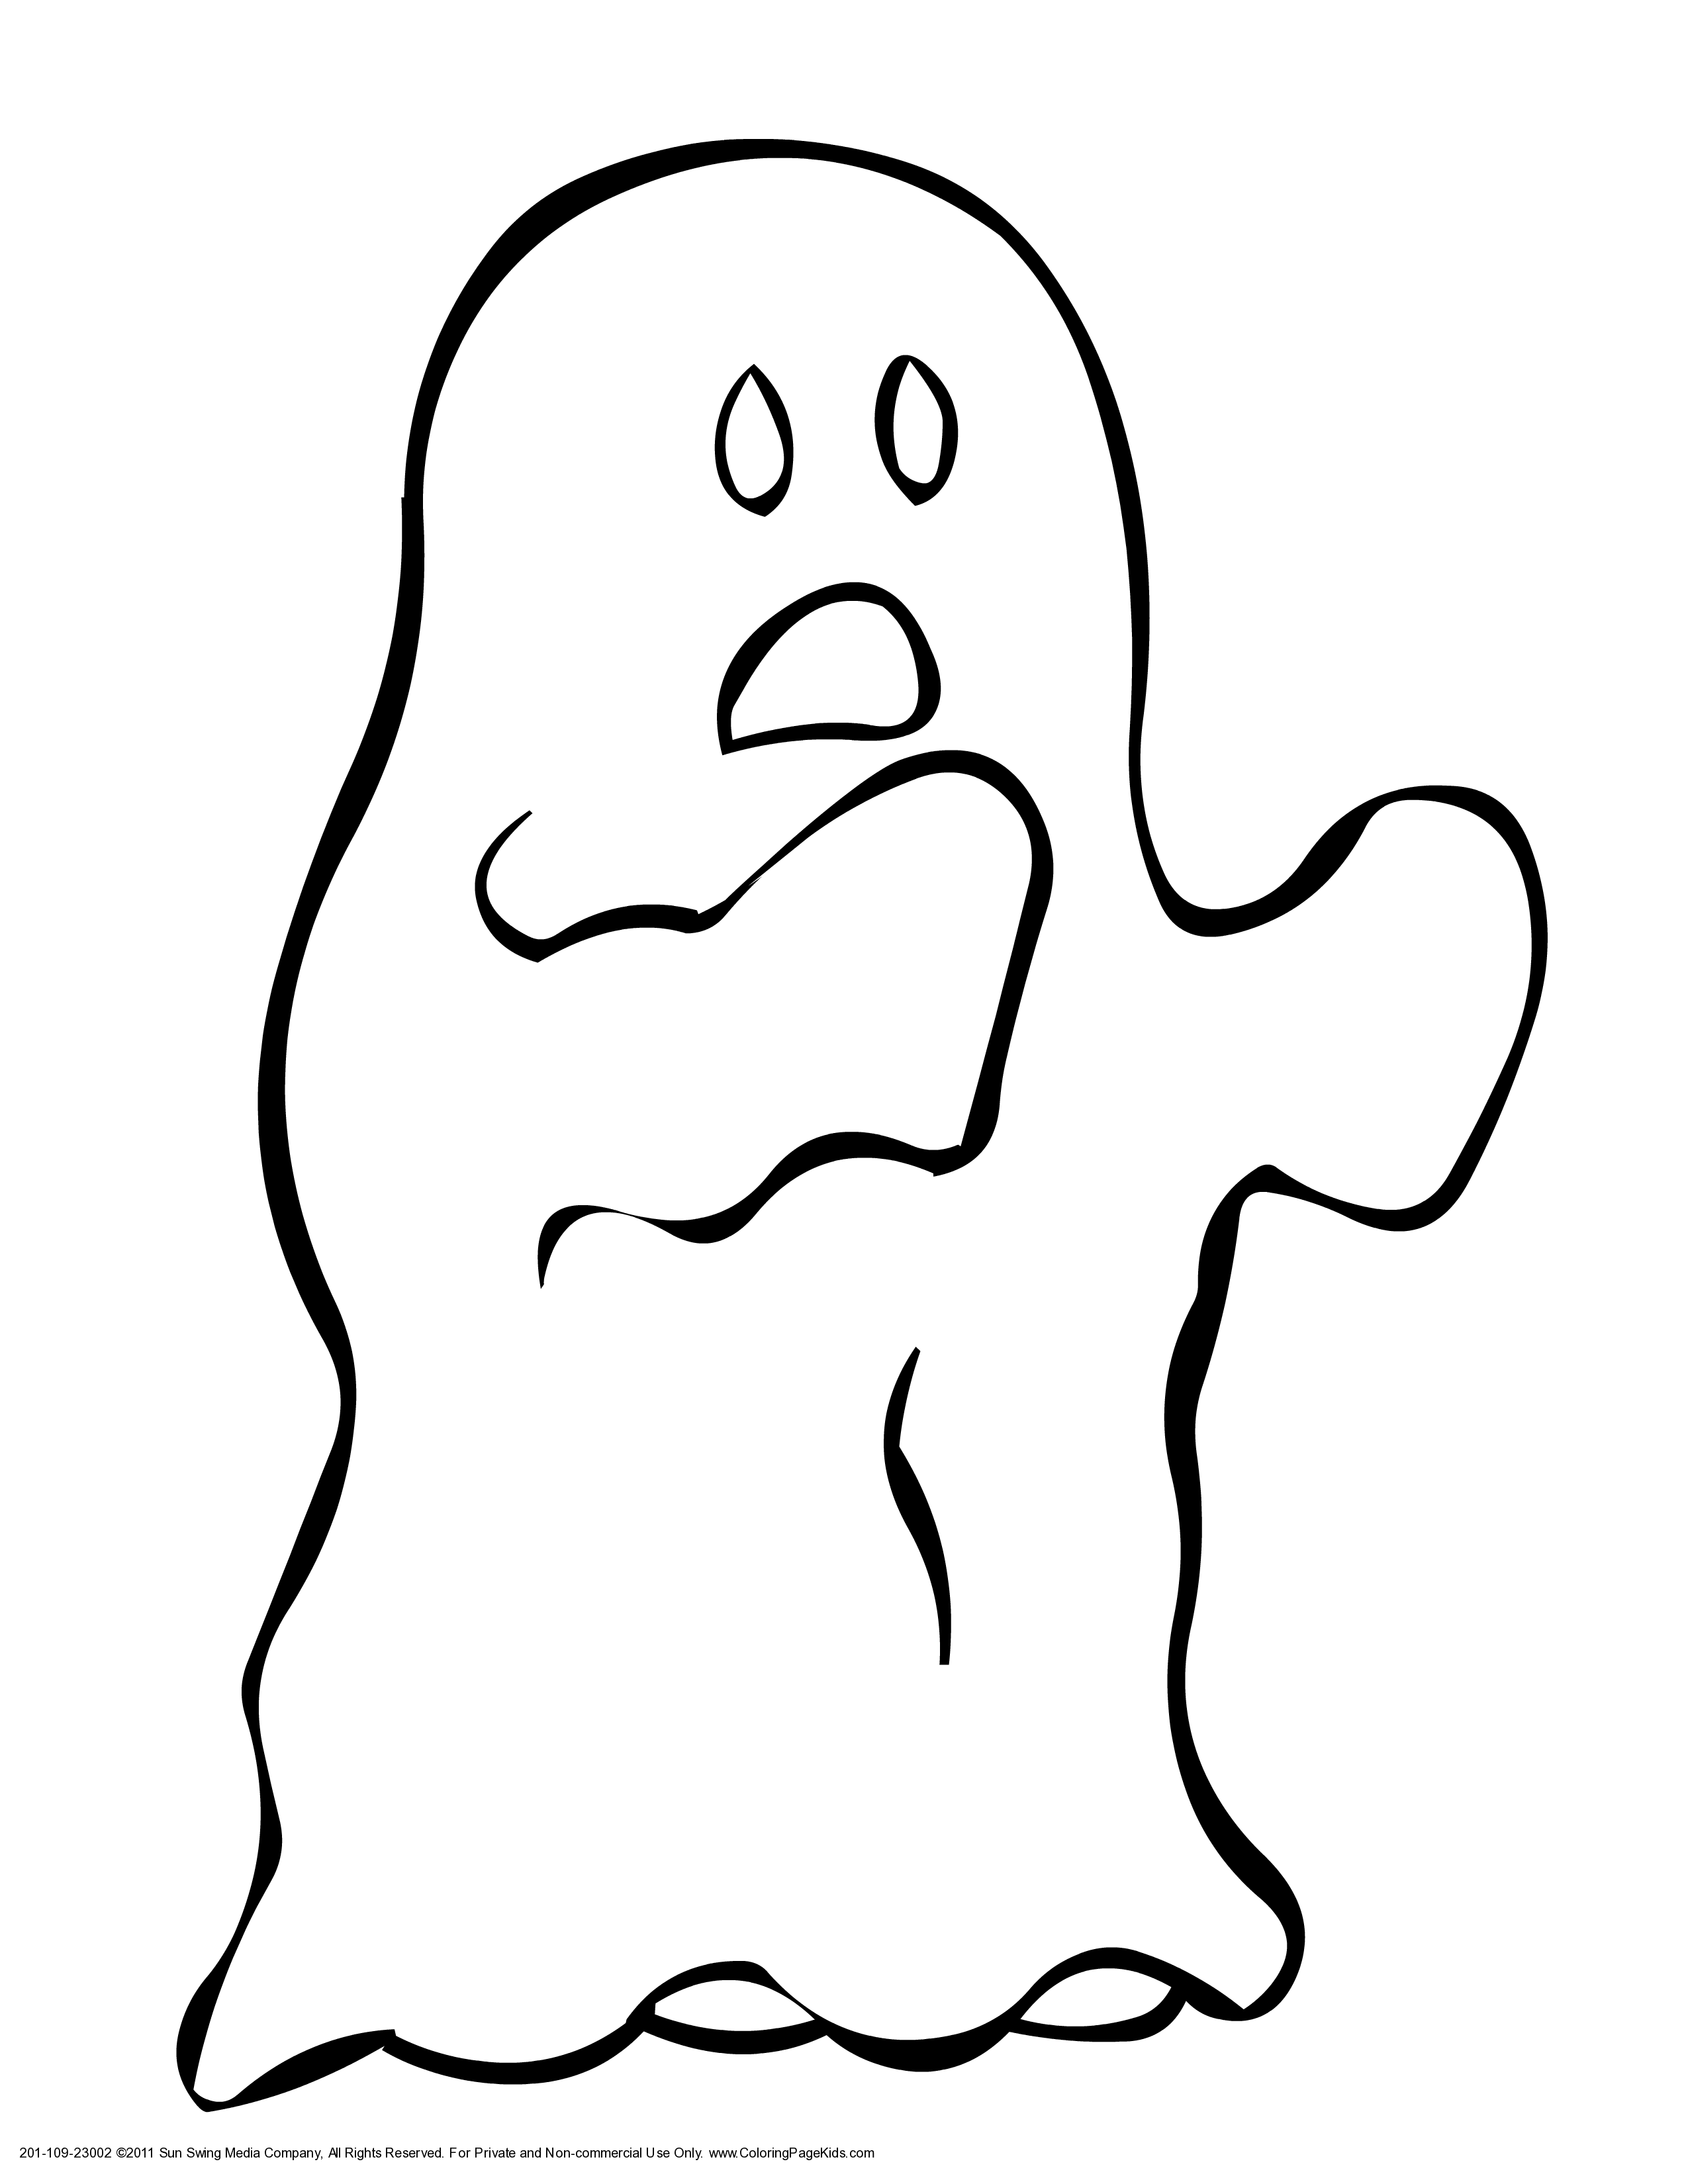 Halloween Ghost Coloring Pages | Halloween Wallpapers 2014